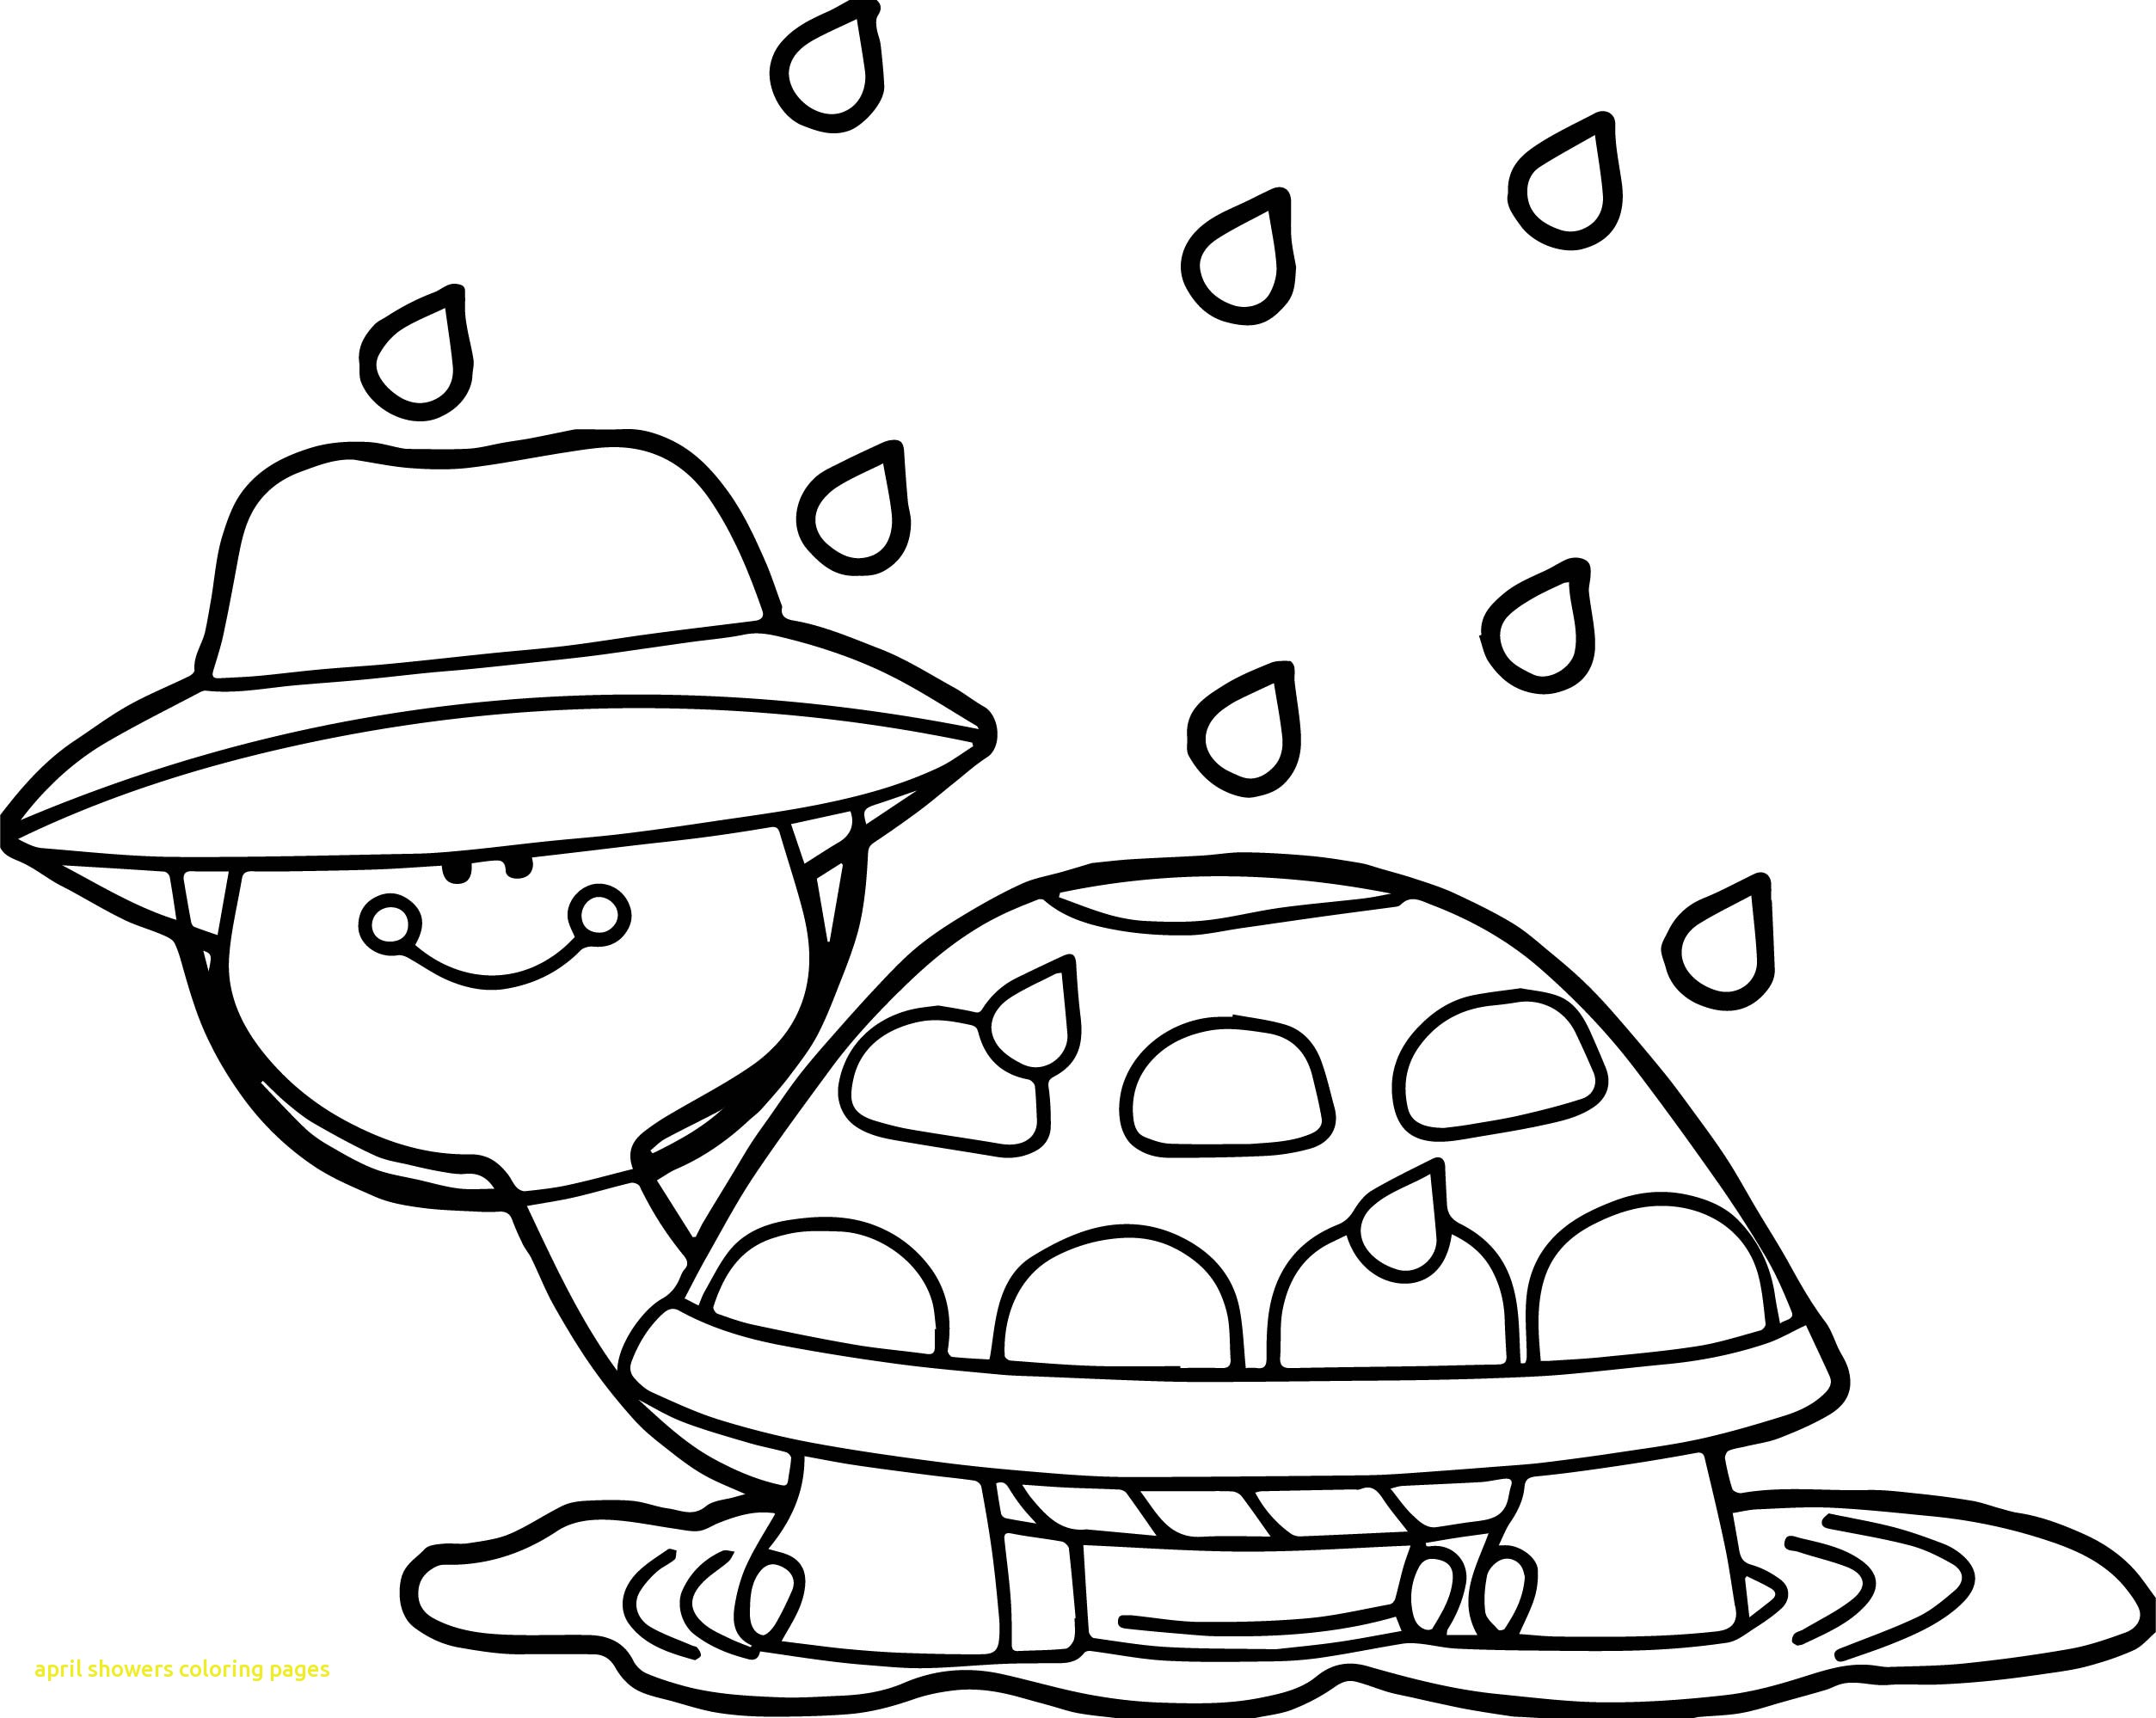 april-showers-coloring-pages-at-getcolorings-free-printable-colorings-pages-to-print-and-color